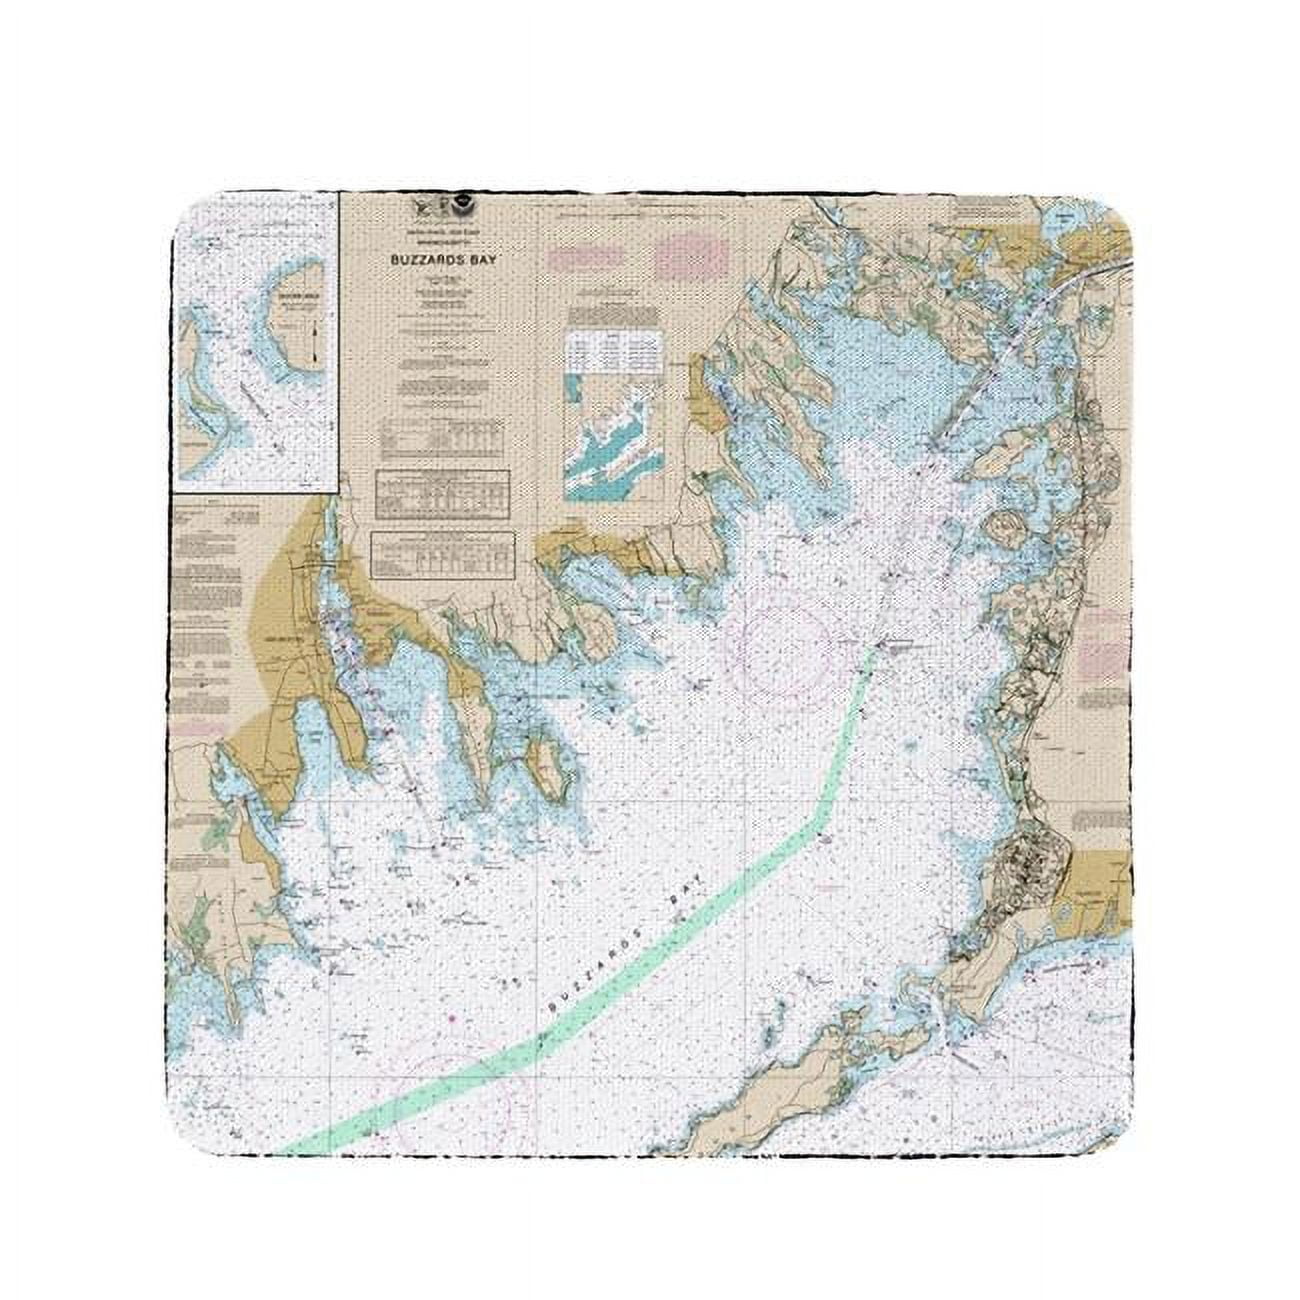 Ct13230bb 4 X 4 In. Buzzards Bay, Ma Nautical Map Coaster - Set Of 4